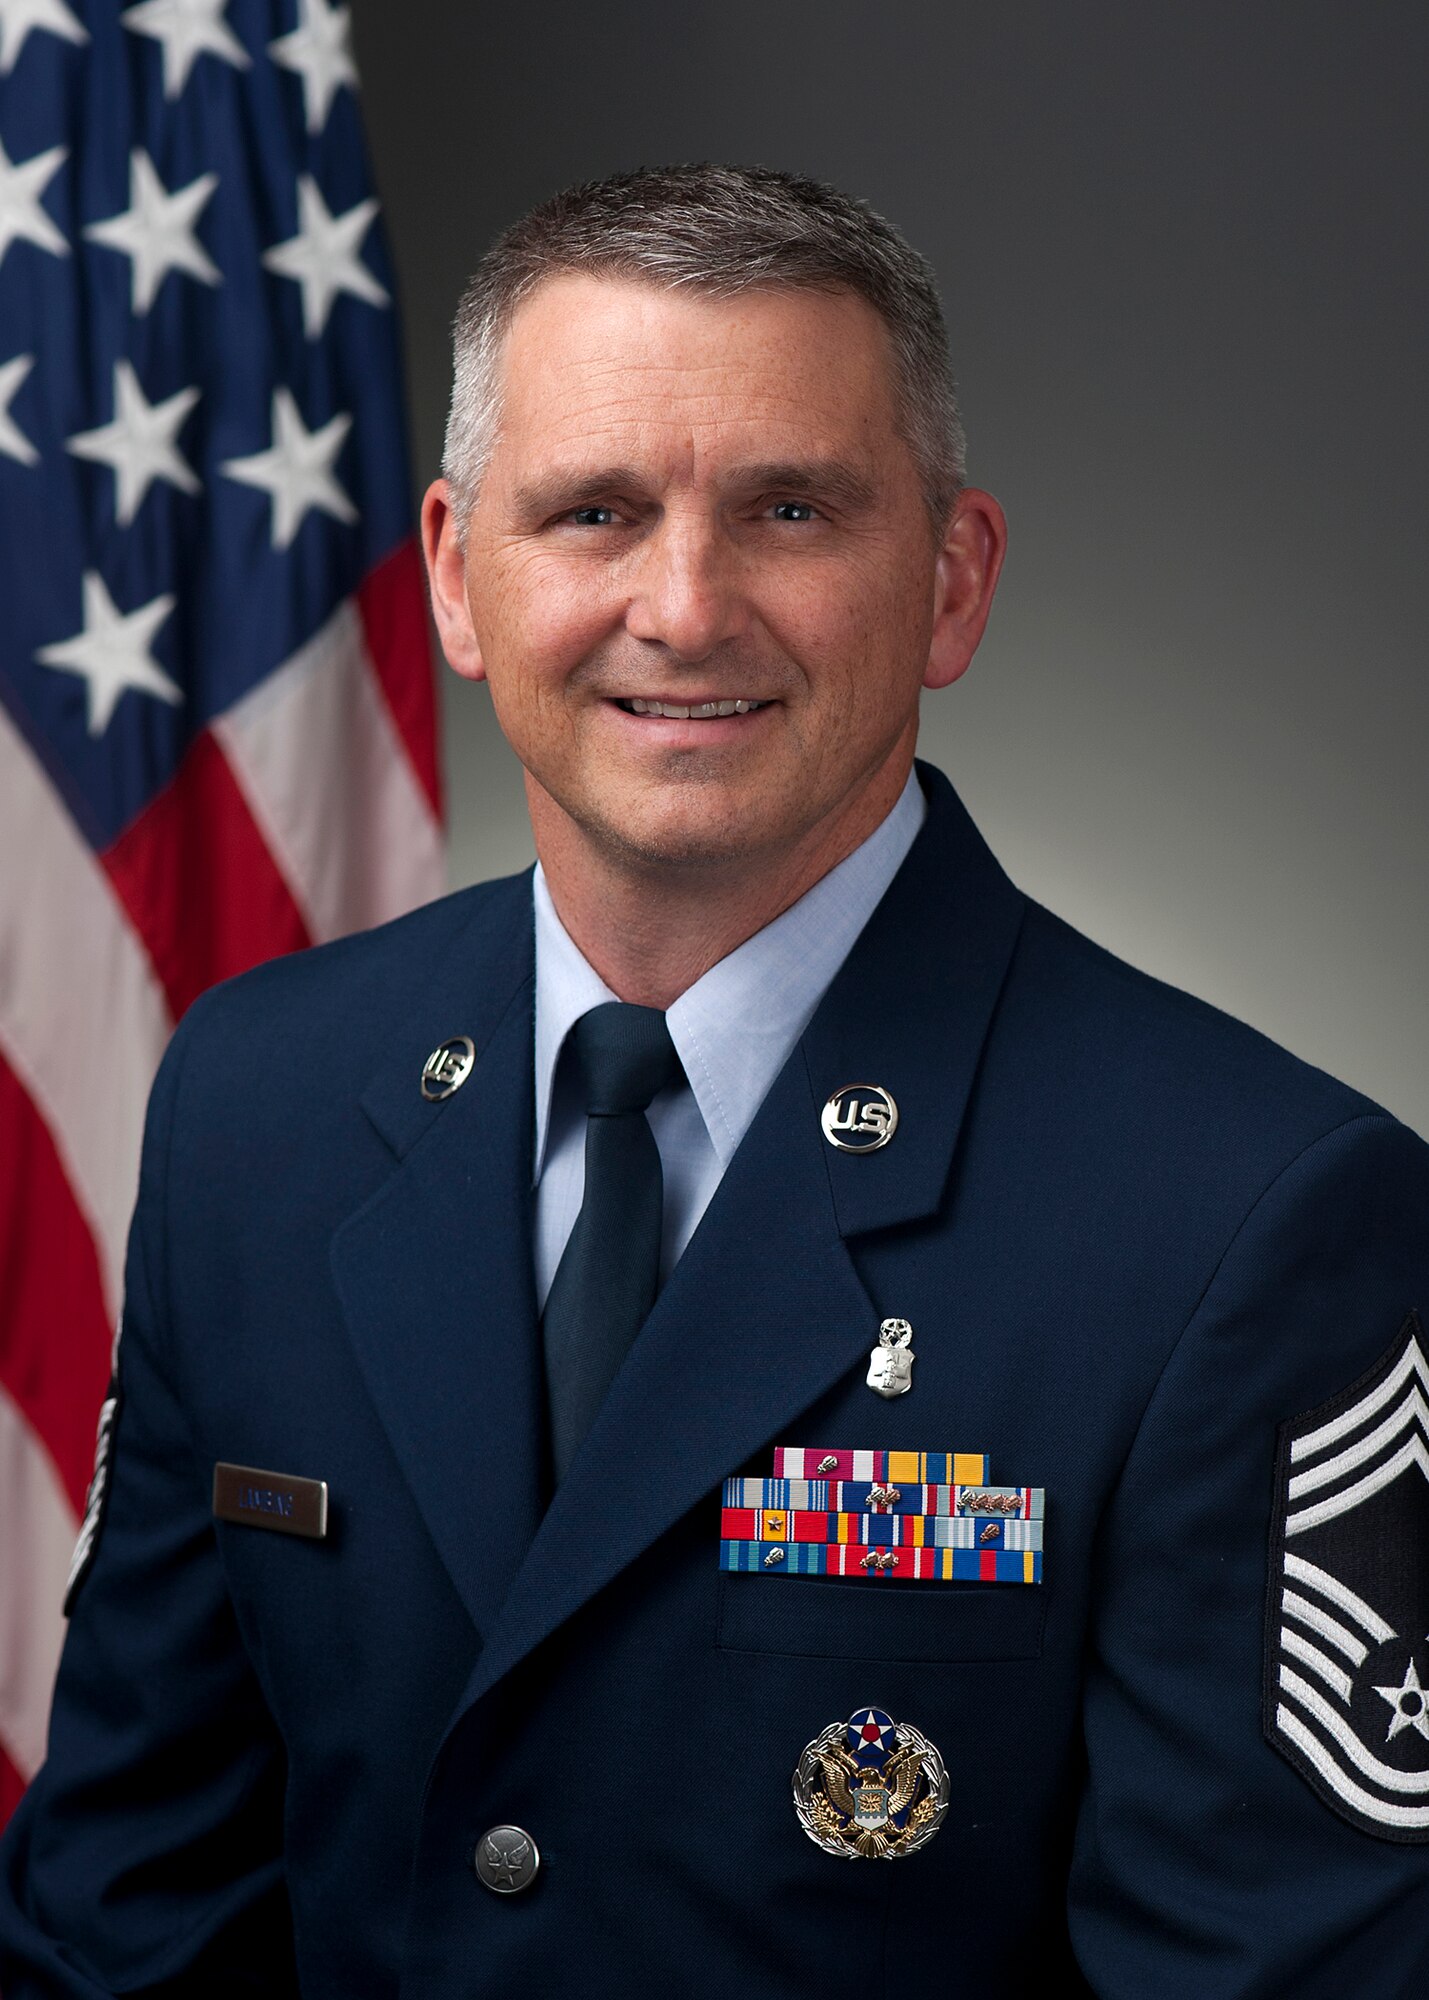 Chief Master Sgt. Kevin J. Lambing, Chief, Medical Enlisted Force, is the highest Enlisted medical position in the Air Force to lead more than 32,000 Total Force medics globally. He became the 6th CMEF on June 8, 2012. (Air Force Photo)
